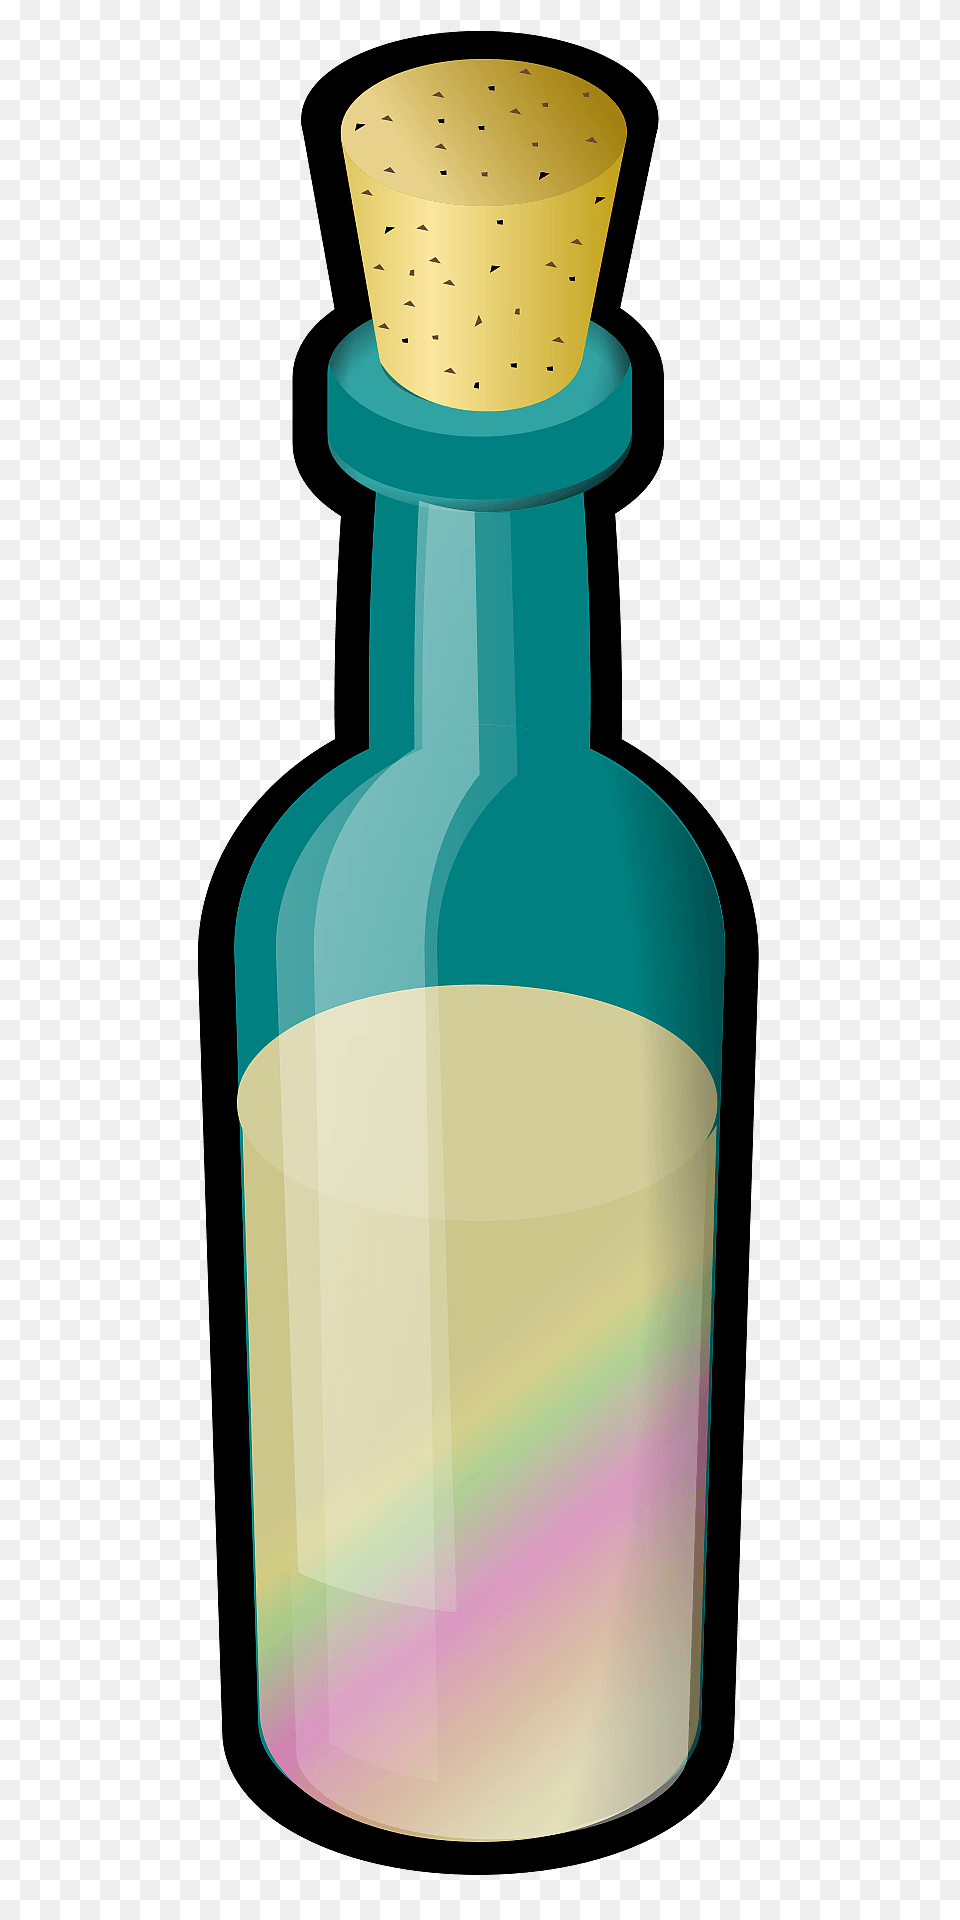 Bottle Of Colored Sand With Cork Clipart, Cosmetics, Perfume Free Transparent Png